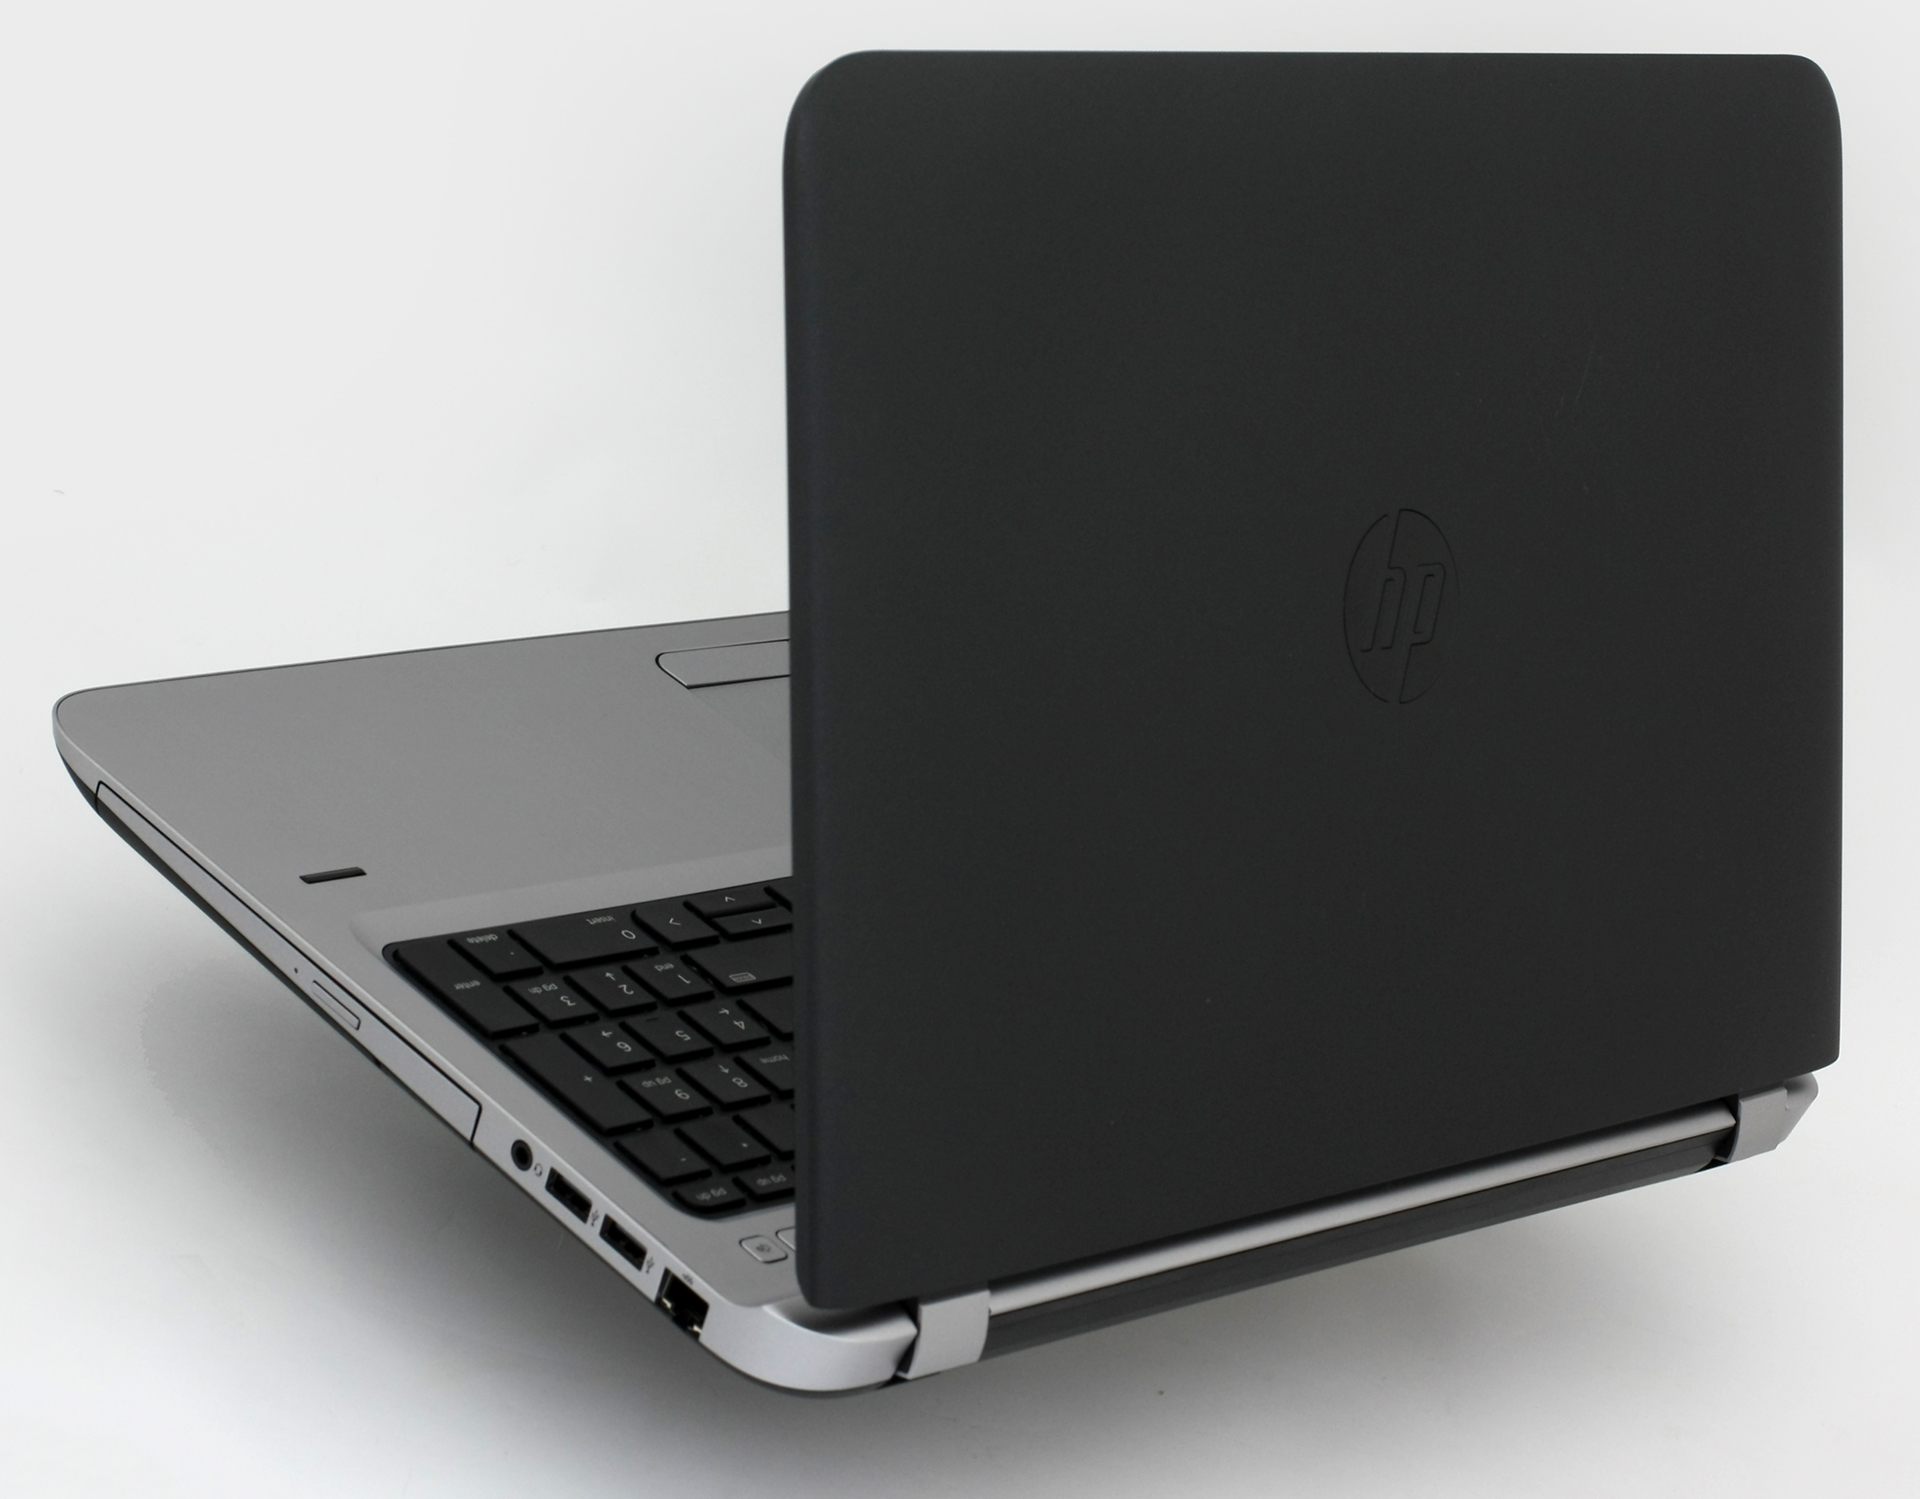 HP ProBook 450 G3 / 455 G3 review - what a budget business